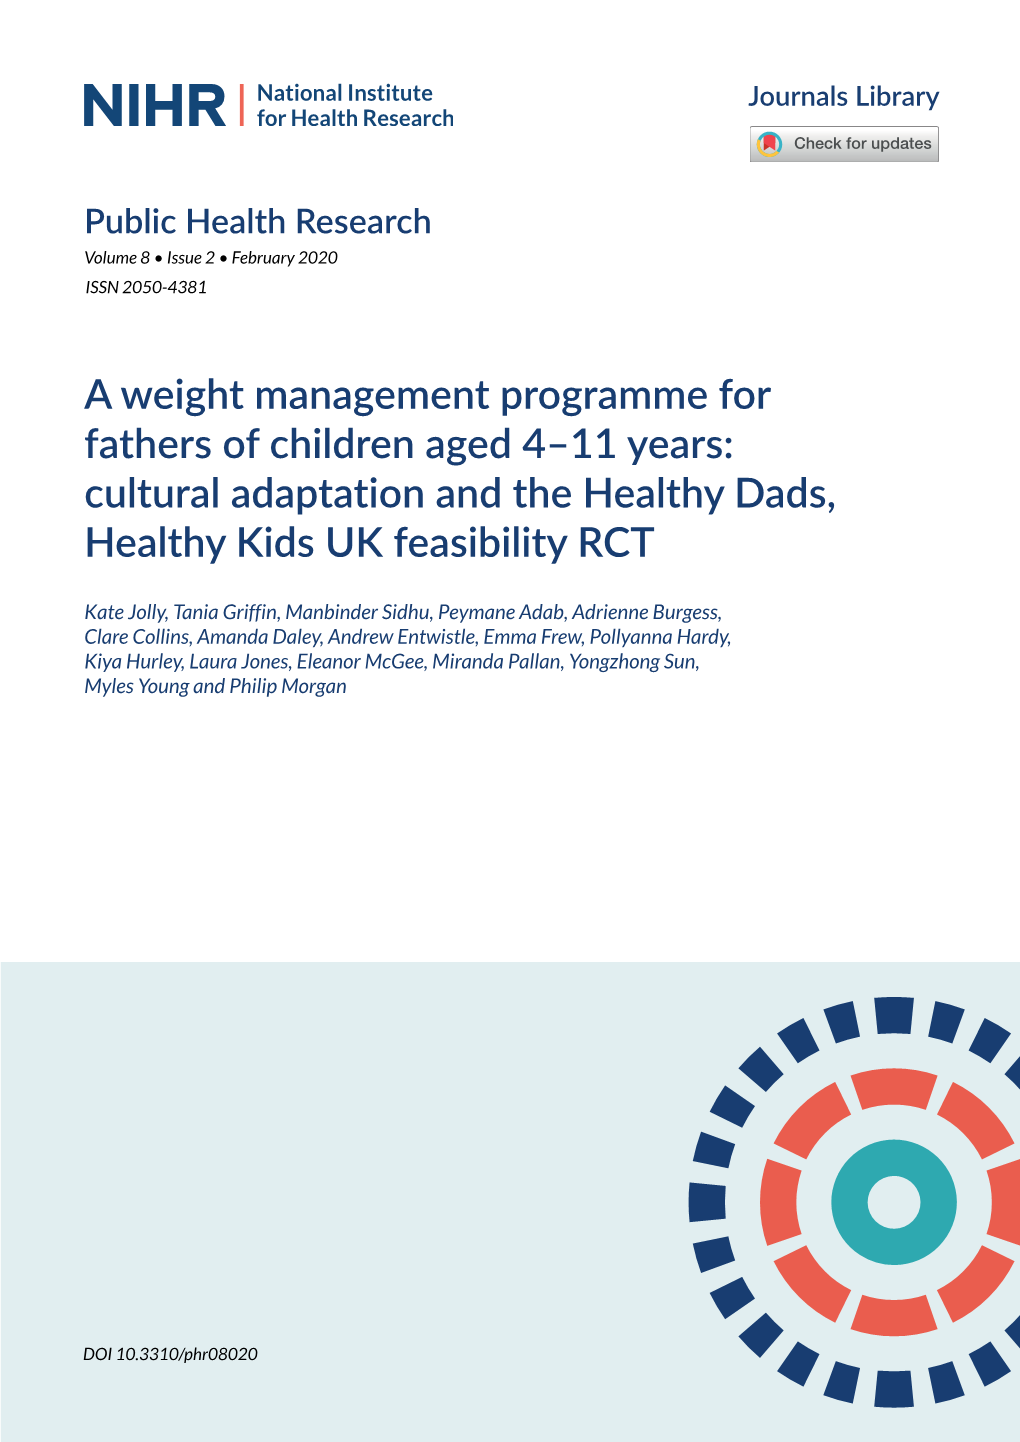 A Weight Management Programme for Fathers of Children Aged 4–11 Years: Cultural Adaptation and the Healthy Dads, Healthy Kids UK Feasibility RCT